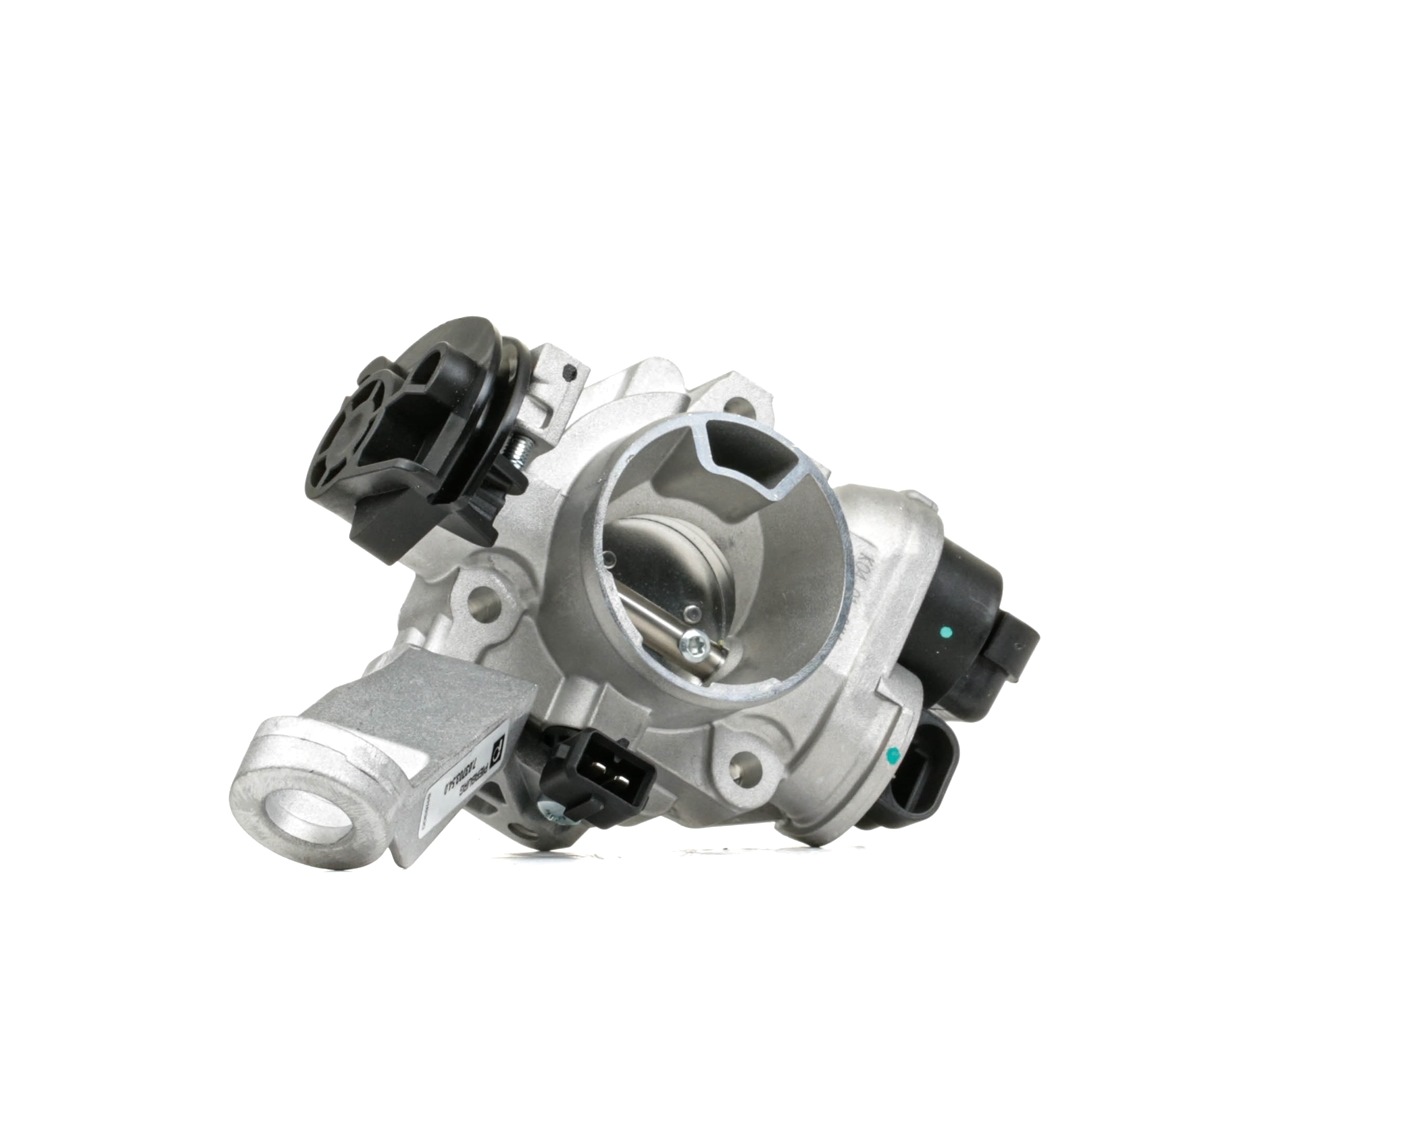 PIERBURG 7.03703.54.0 Throttle body Ø: 36mm, Mechanical, Control Unit/Software must be trained/updated